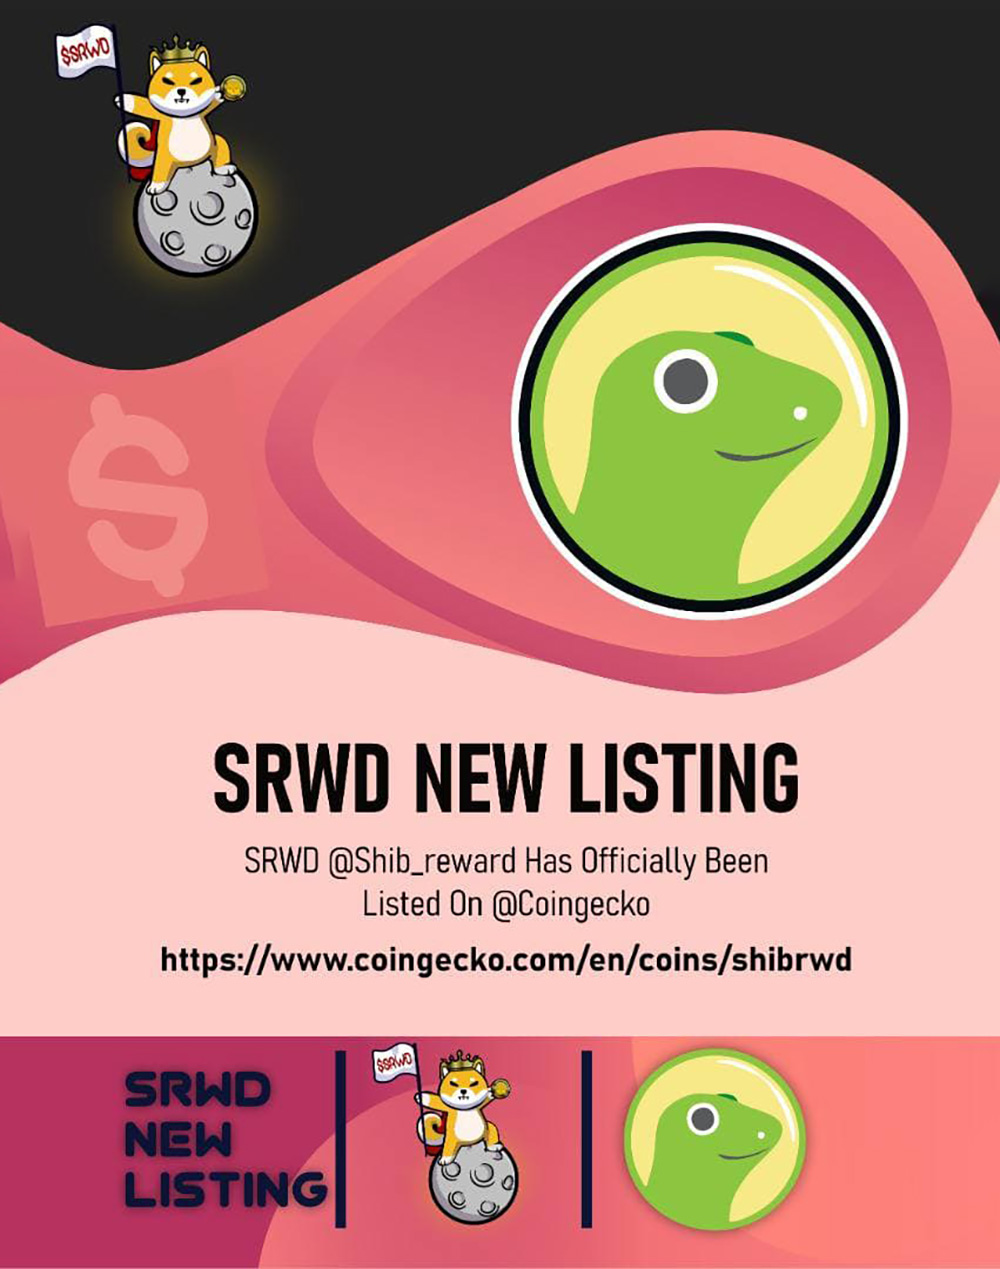 ShibRWD Is Much More Than a Meme Token: $SRWD Aims to Bring Major Value to the Holders and Expand & Empower the SHIB Ecosystem